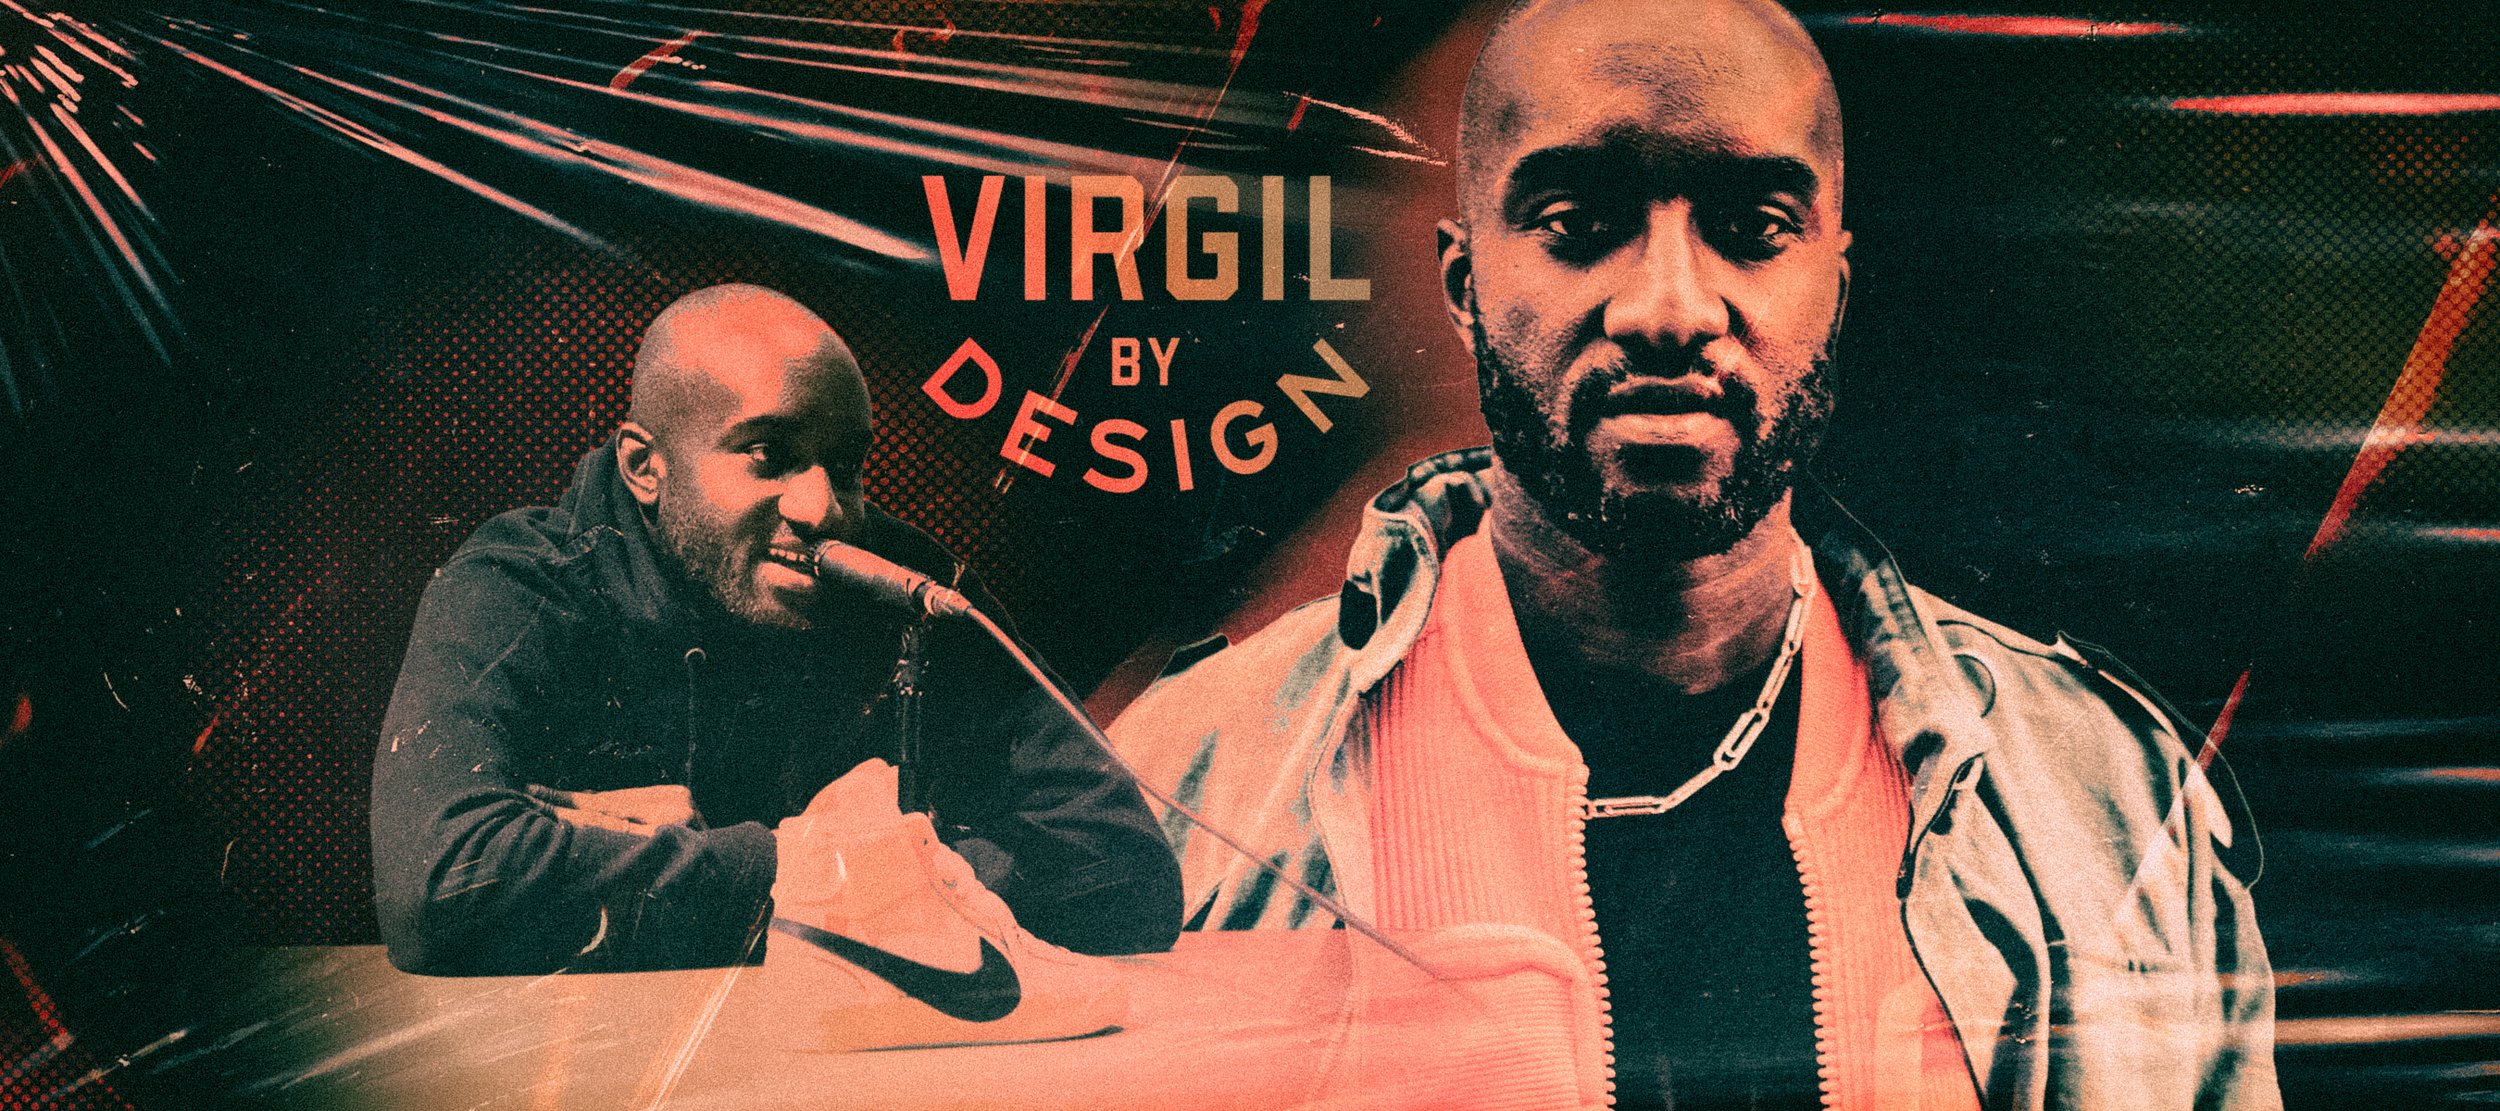 Fashion designer Virgil Abloh, famous for becoming the first